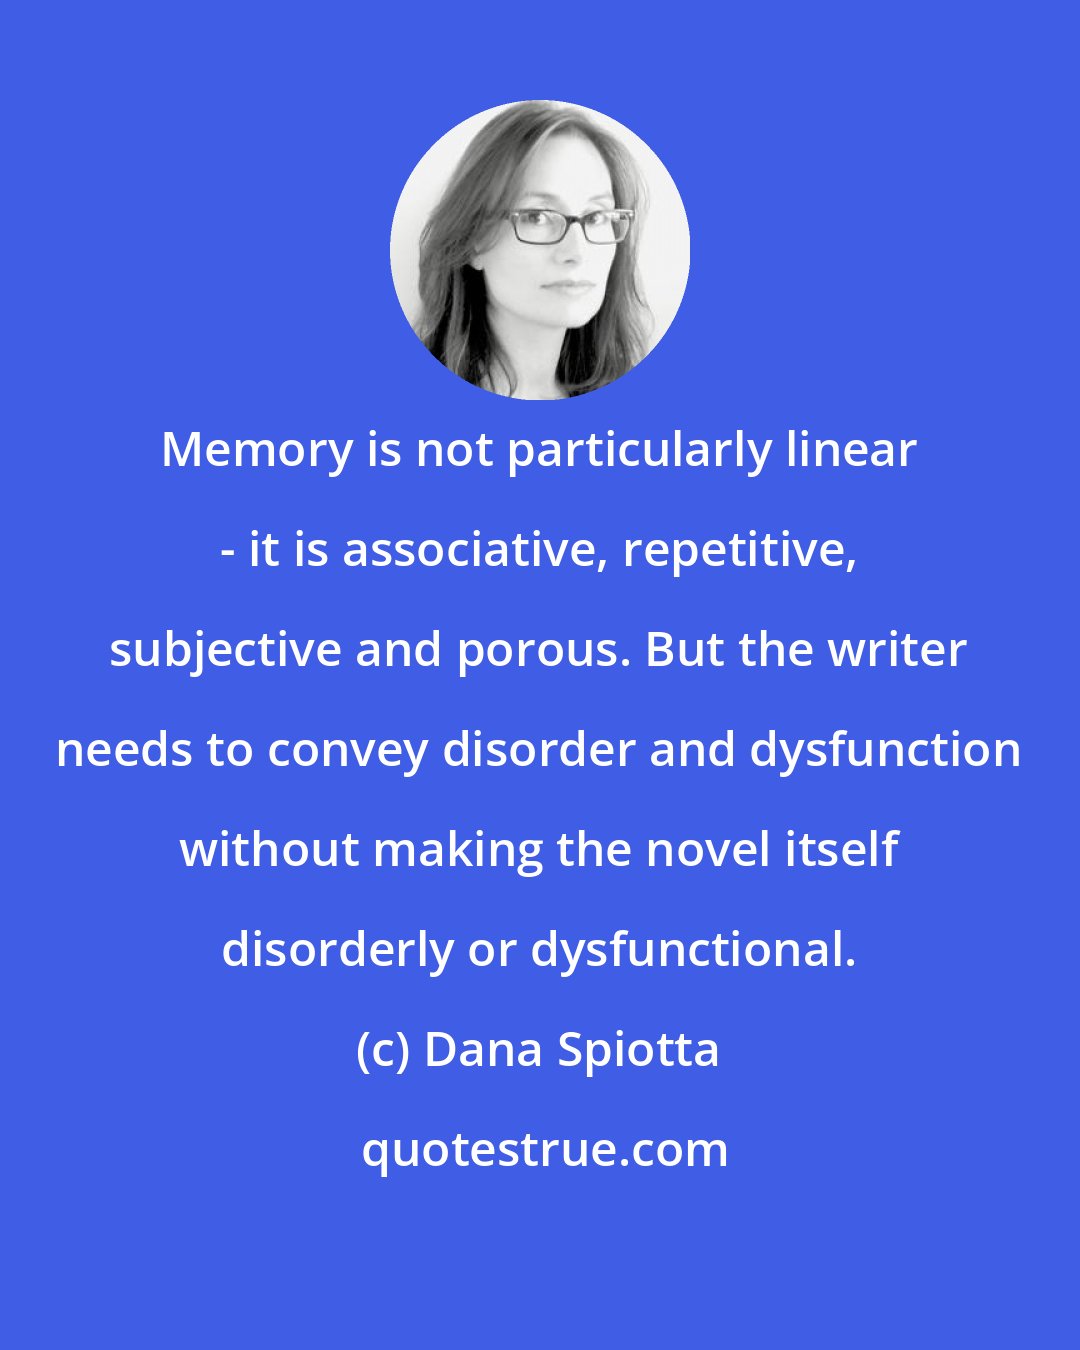 Dana Spiotta: Memory is not particularly linear - it is associative, repetitive, subjective and porous. But the writer needs to convey disorder and dysfunction without making the novel itself disorderly or dysfunctional.